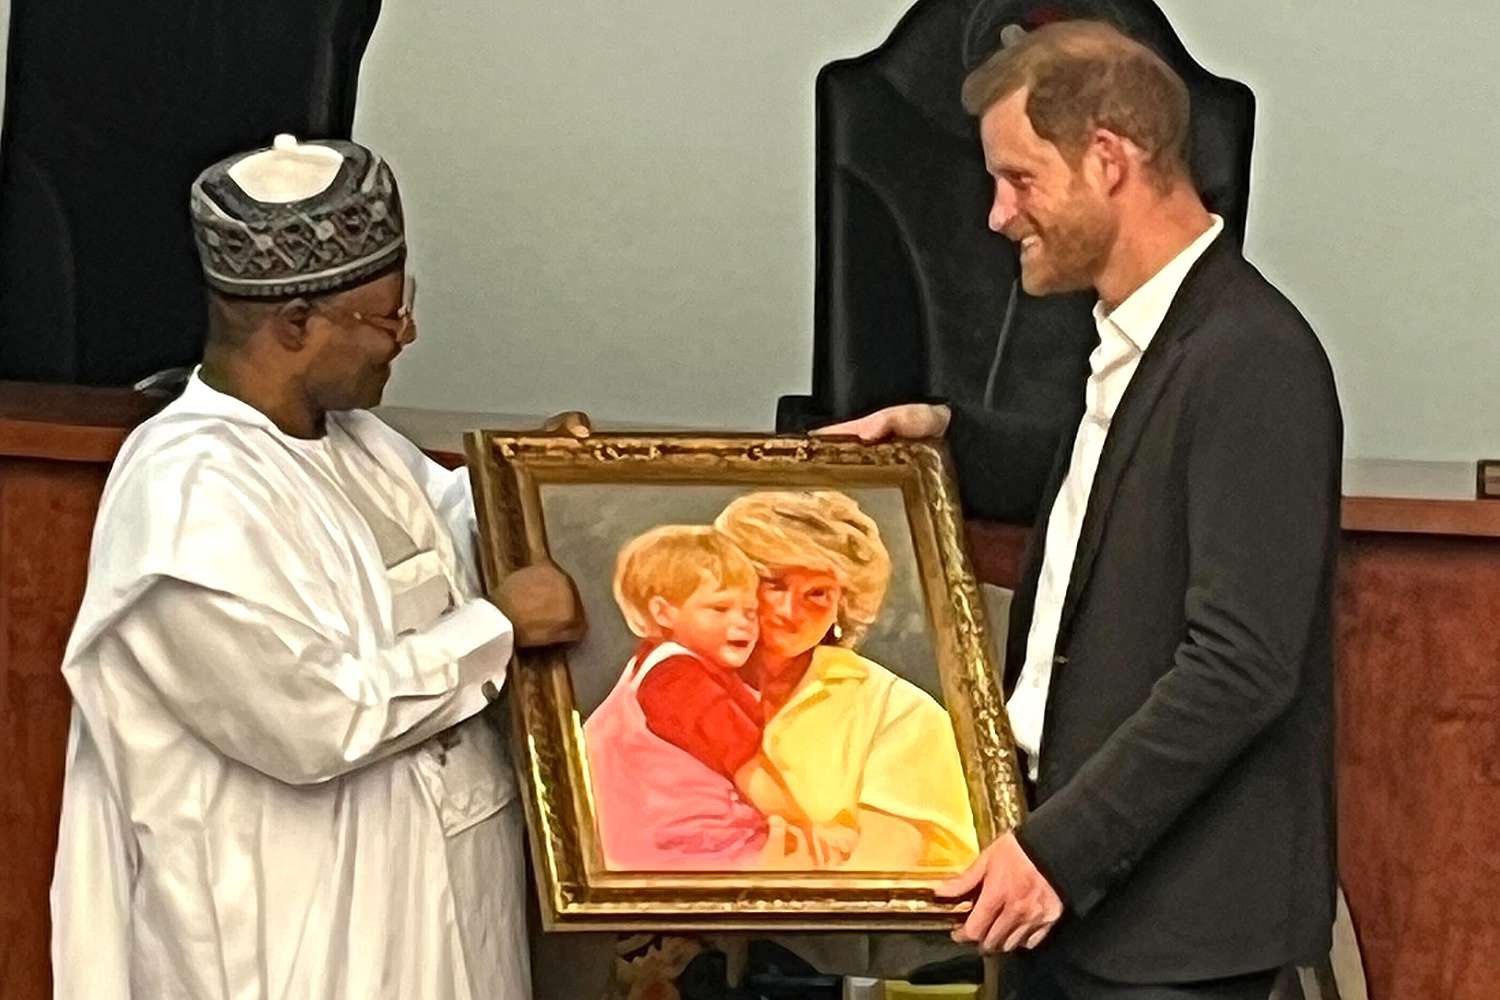 Prince Harry Travels Solo to Nigerian City of Kaduna and Receives Special Gift in Honor of Princess Diana